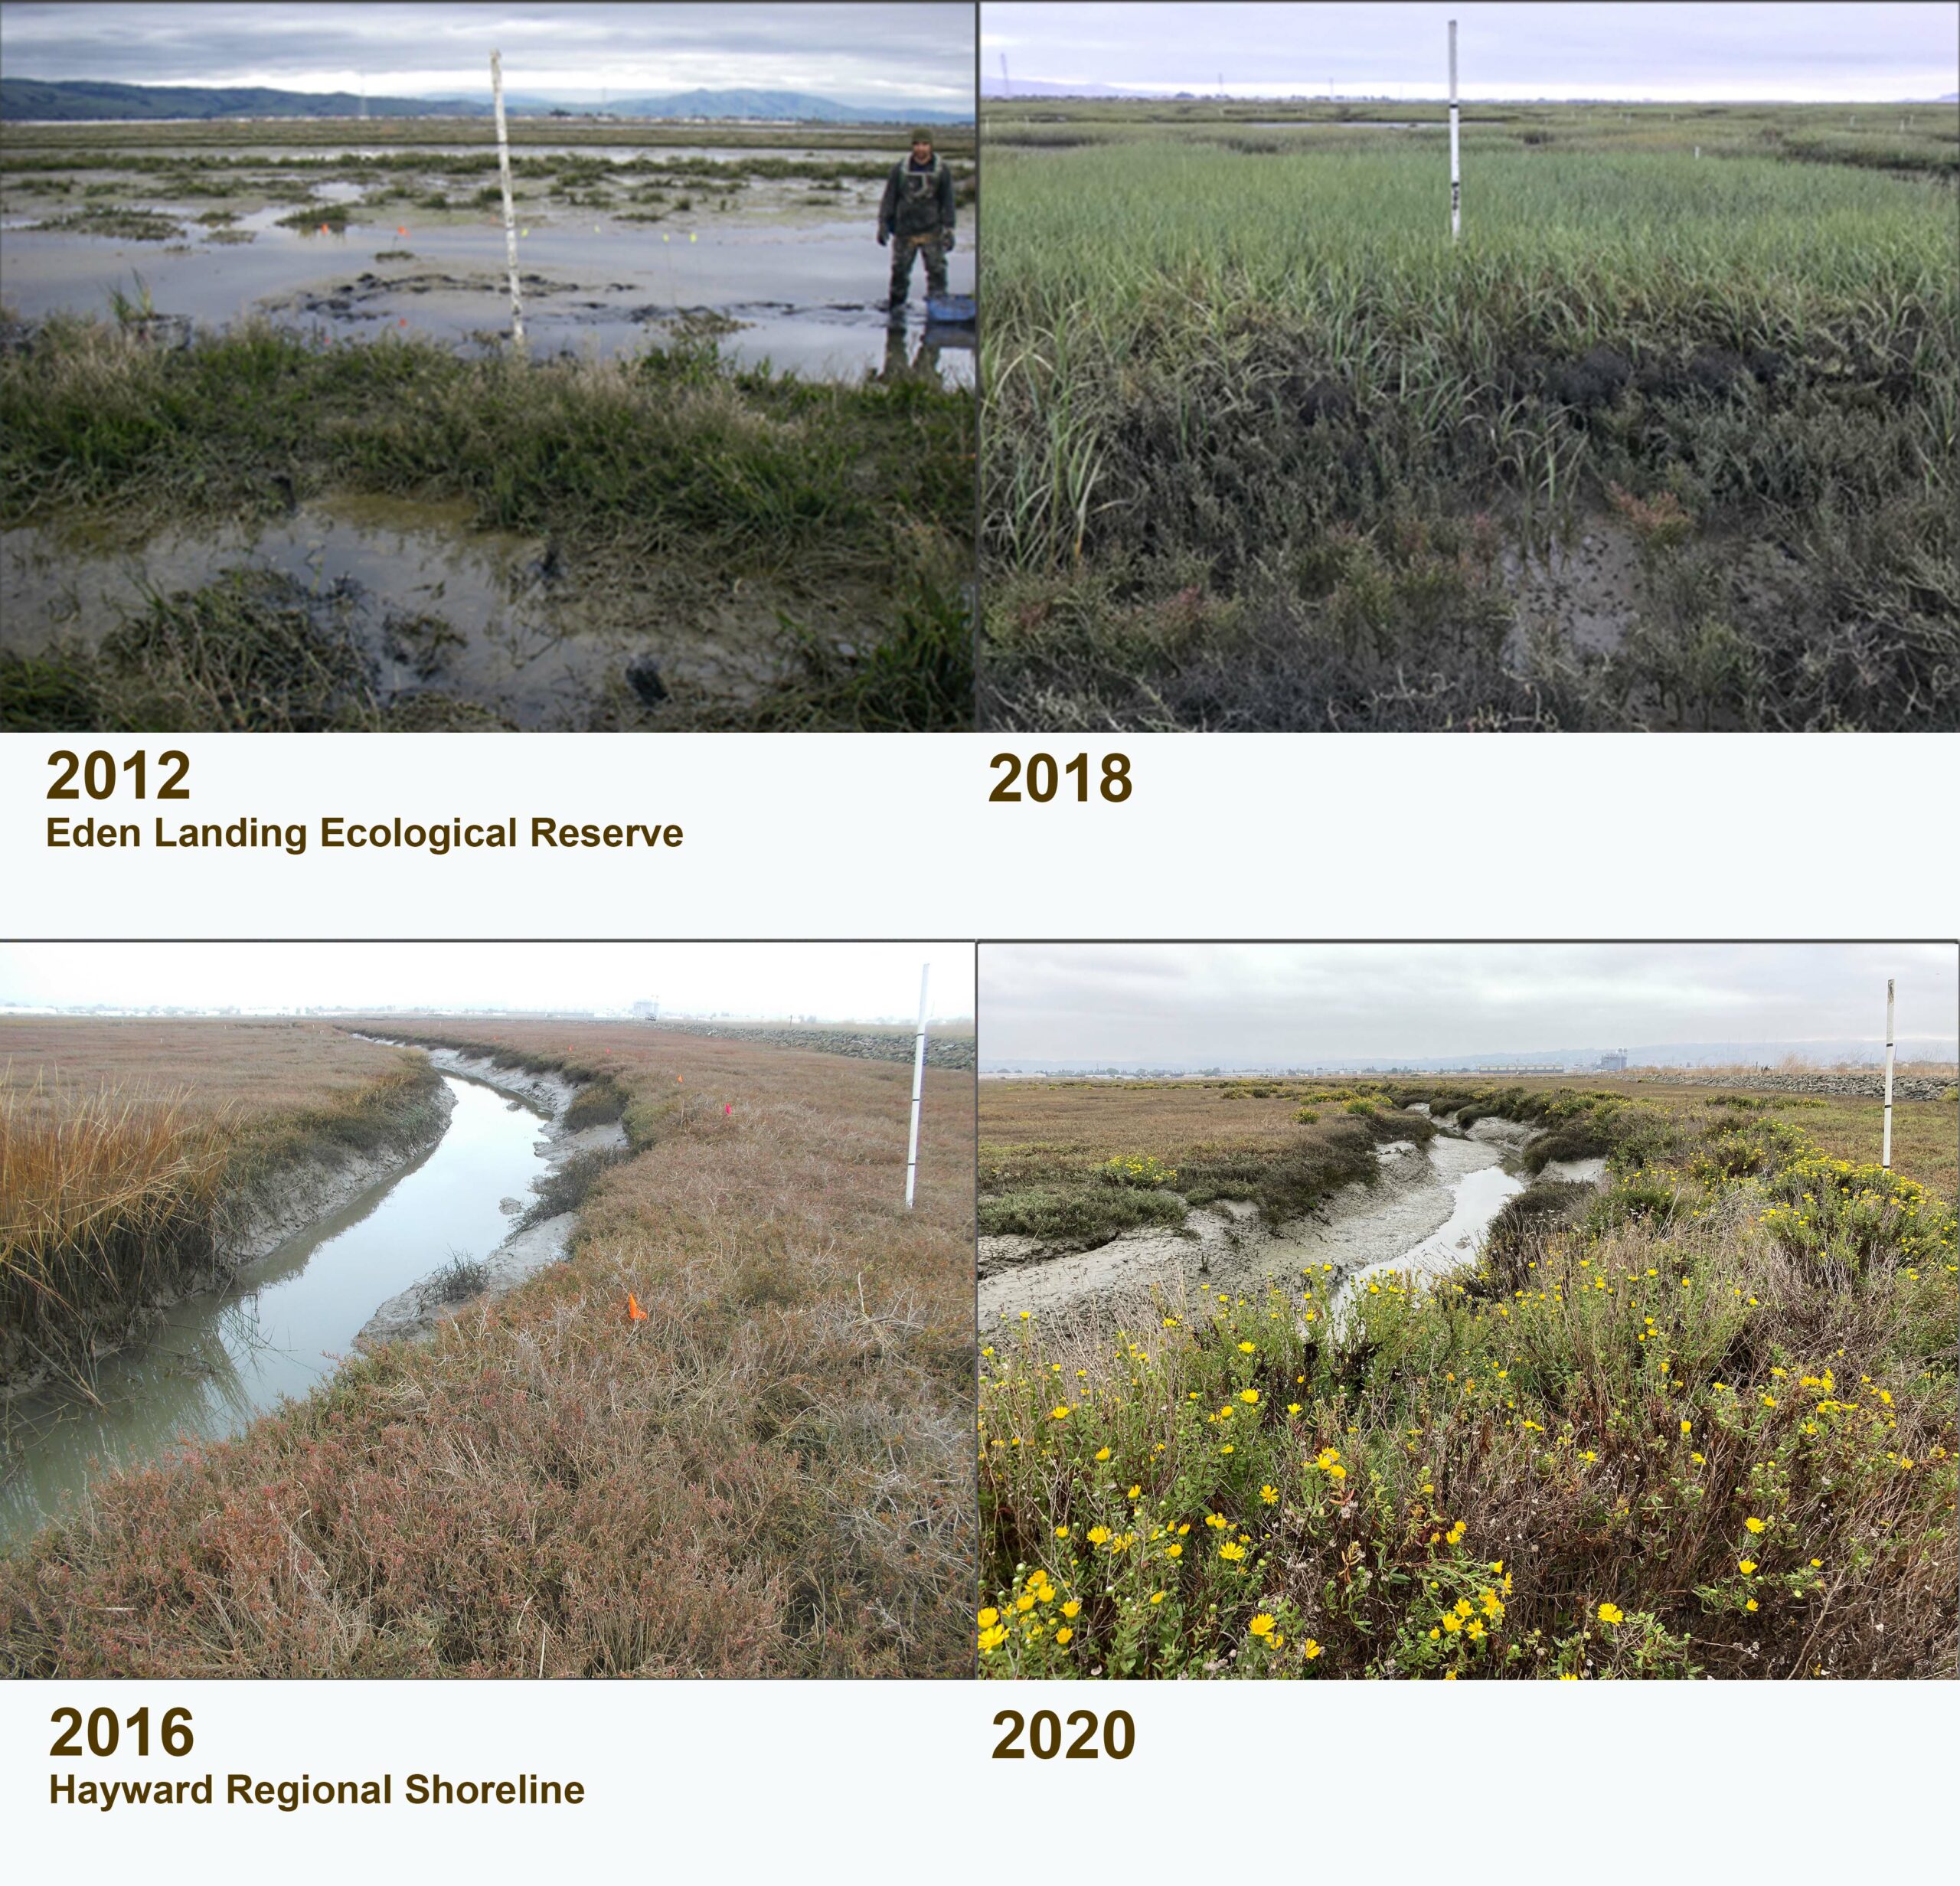 Top row of images shows same mudflat left only mud with a man in boots right tall green grass Bottom row same marsh with waterway left brown grasses right yellow flowers